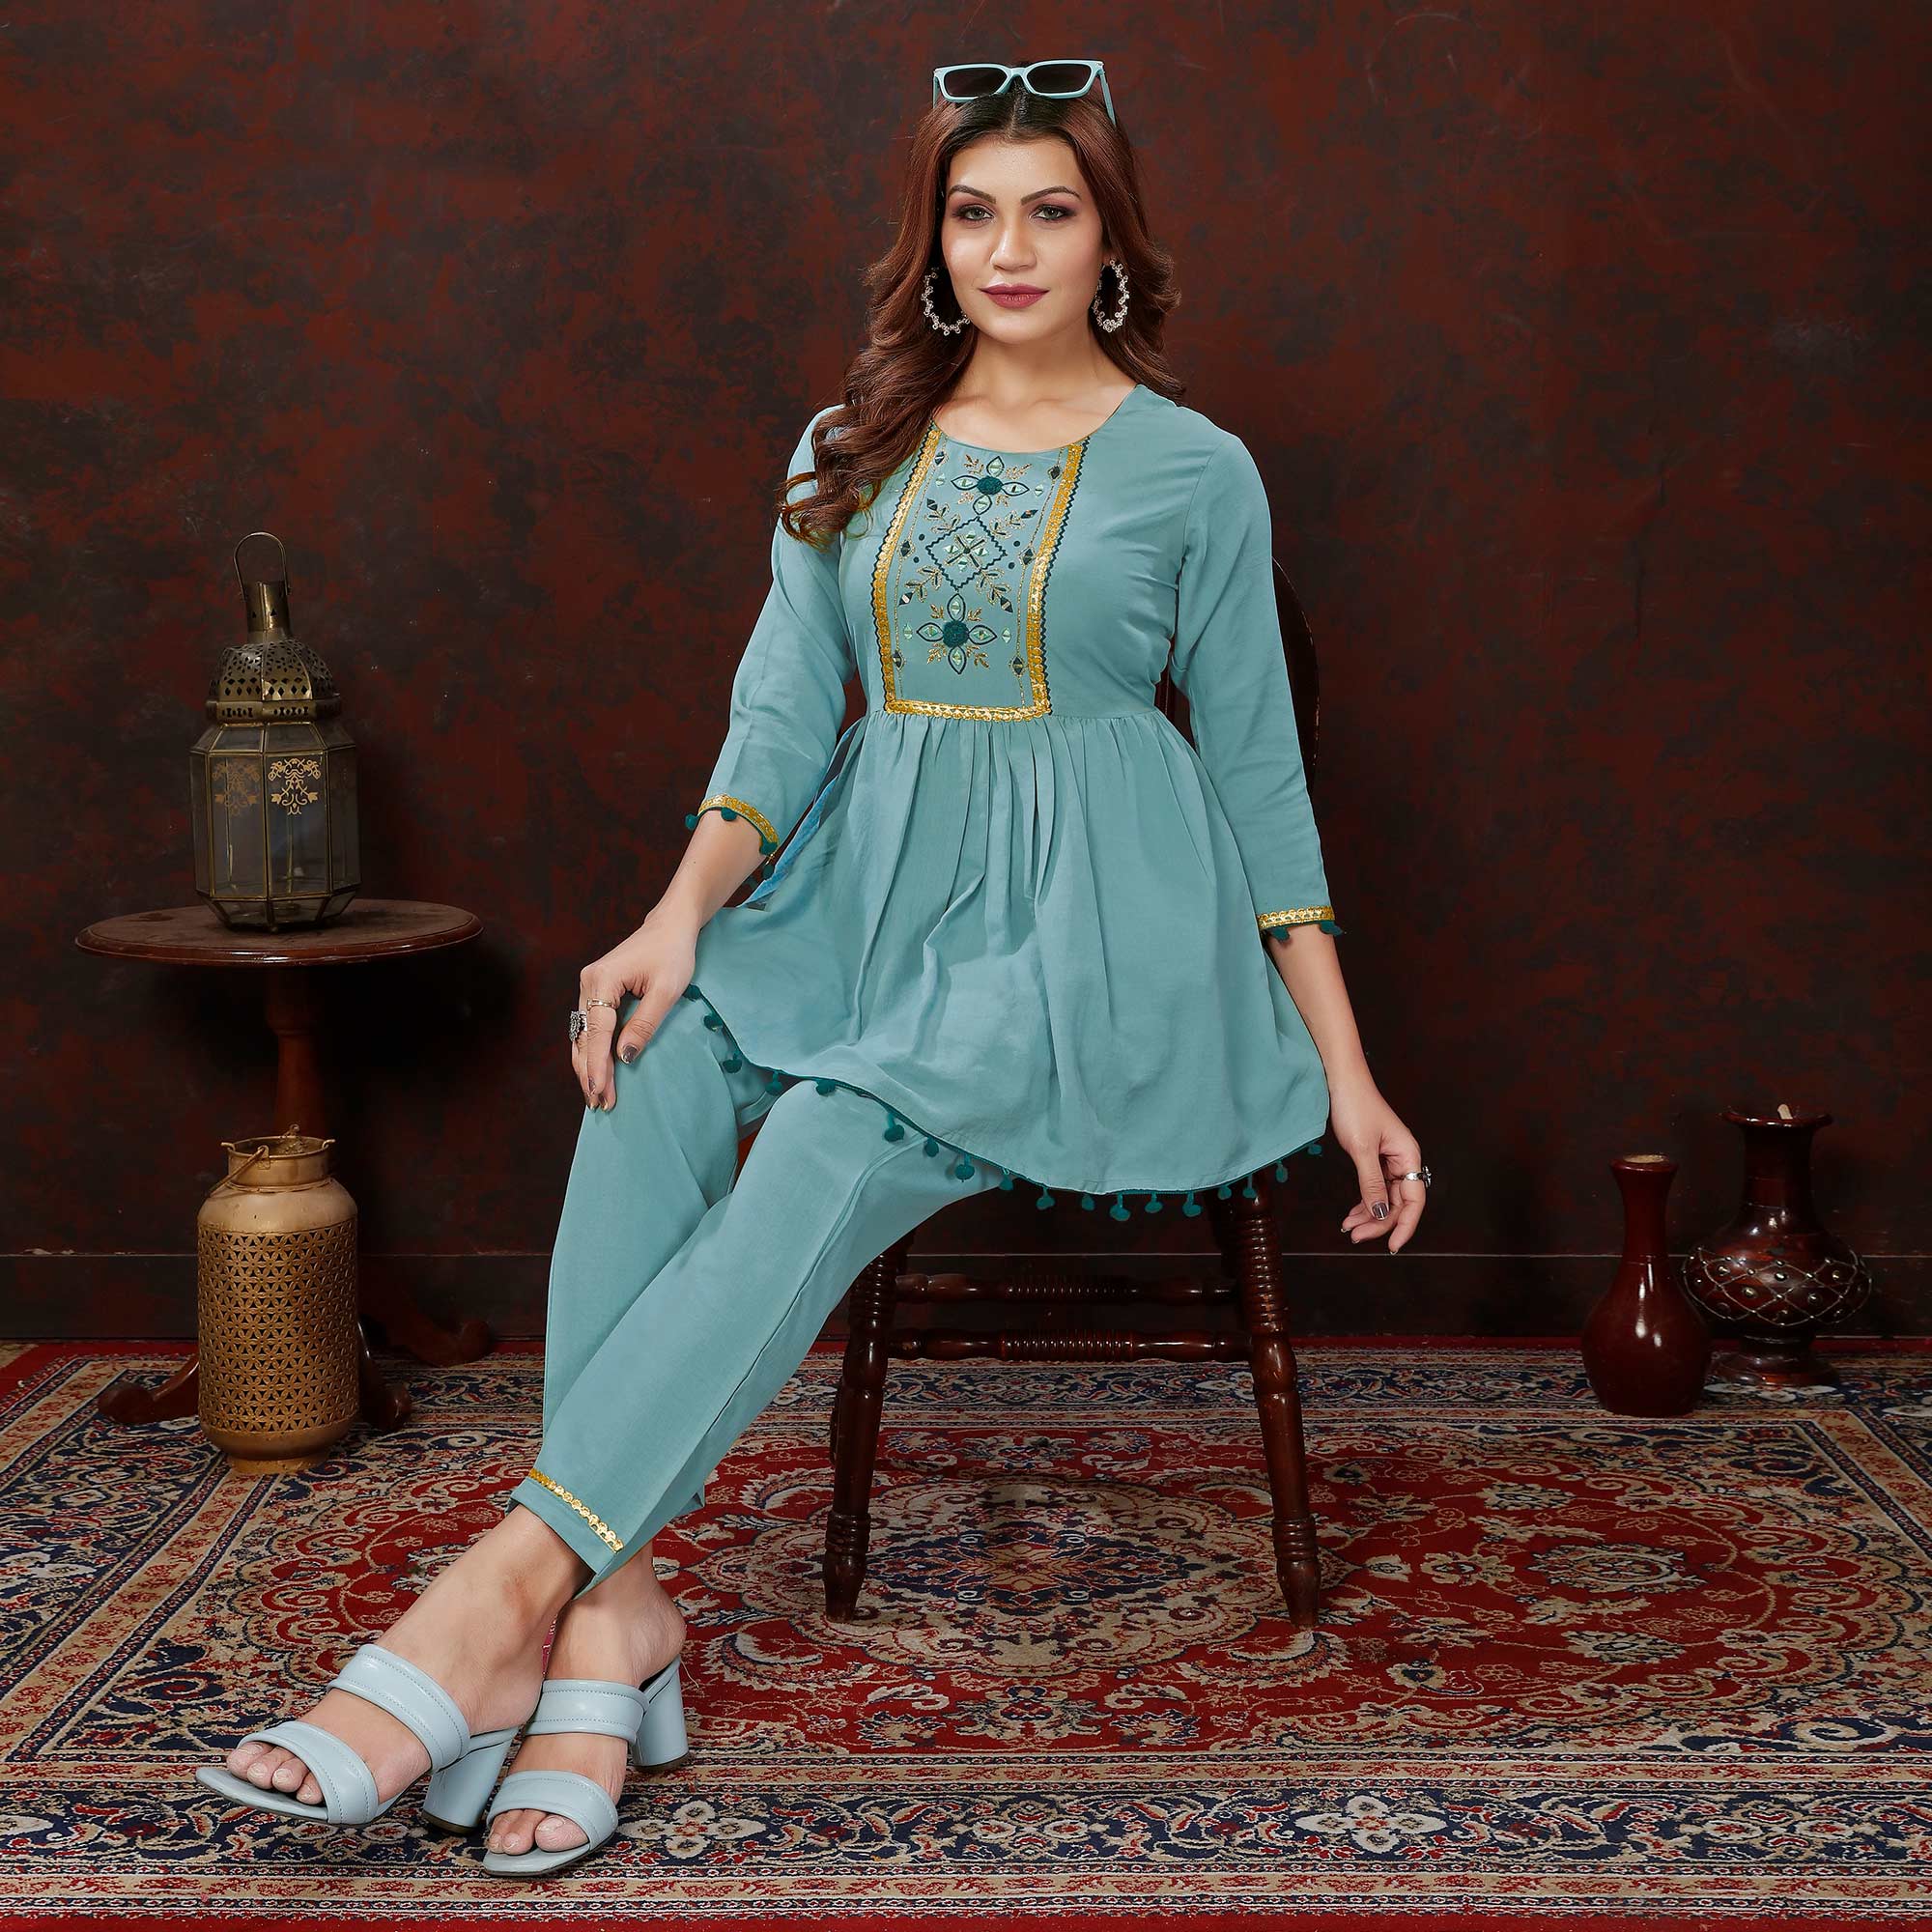 Dusty Turquoise Embroidered Cotton Blend Co Ord Set